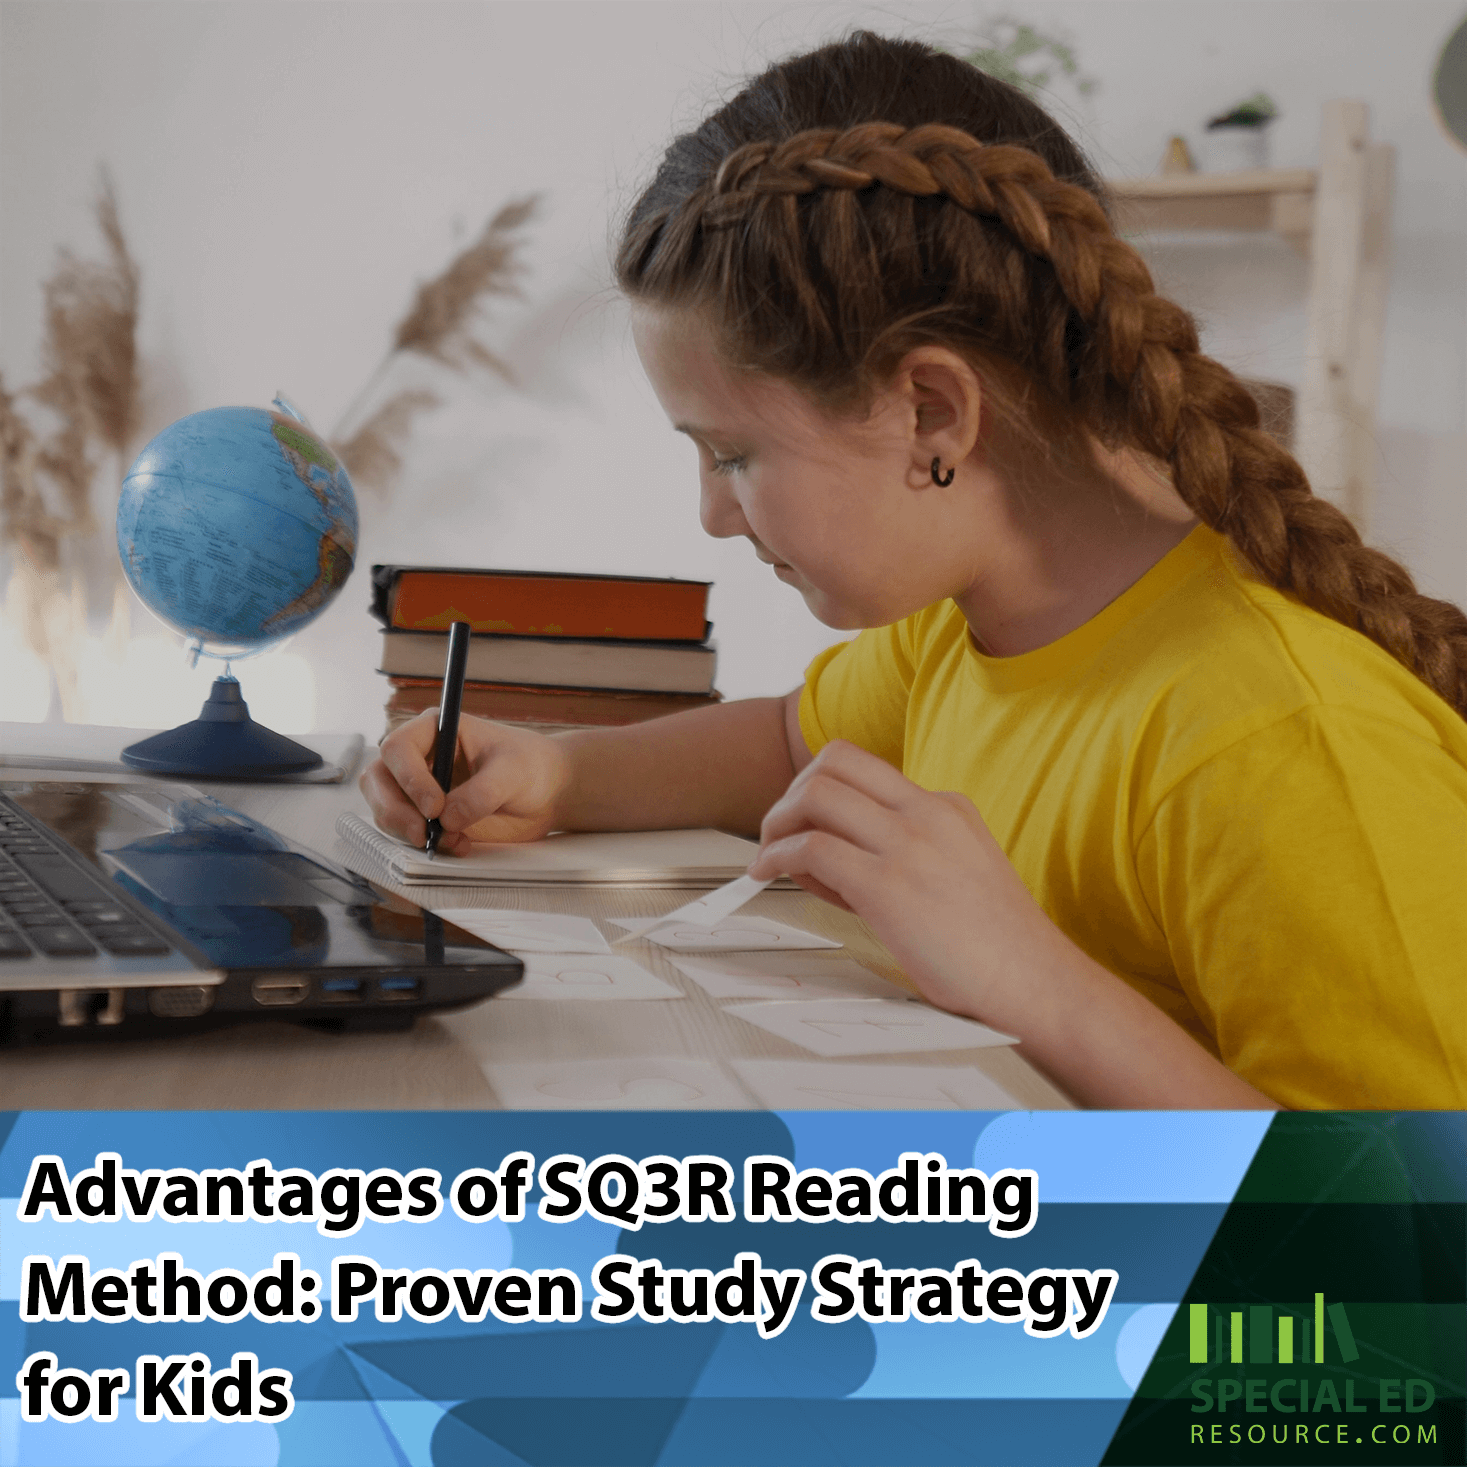 A young girl with a braided hairstyle is sitting at a desk, writing in a notebook. The desk has a globe, a laptop, and a stack of books. The text overlay reads, "Advantages of SQ3R Reading Method: Proven Study Strategy for Kids" with a logo for Special Ed Resource in the bottom right corner.